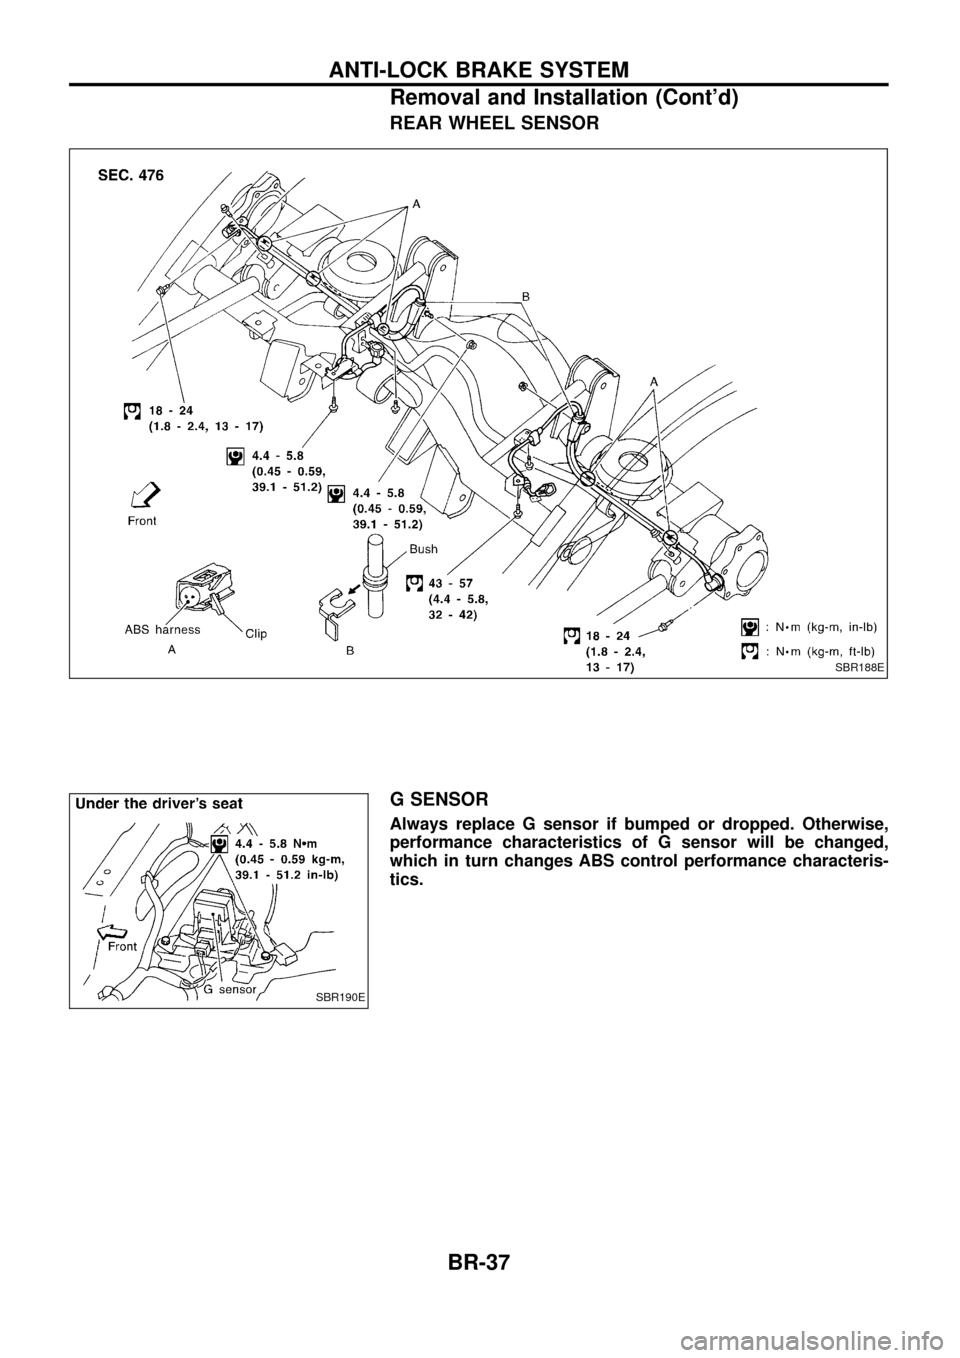 NISSAN PATROL 1998 Y61 / 5.G Brake System Workshop Manual REAR WHEEL SENSOR
G SENSOR
Always replace G sensor if bumped or dropped. Otherwise,
performance characteristics of G sensor will be changed,
which in turn changes ABS control performance characteris-
